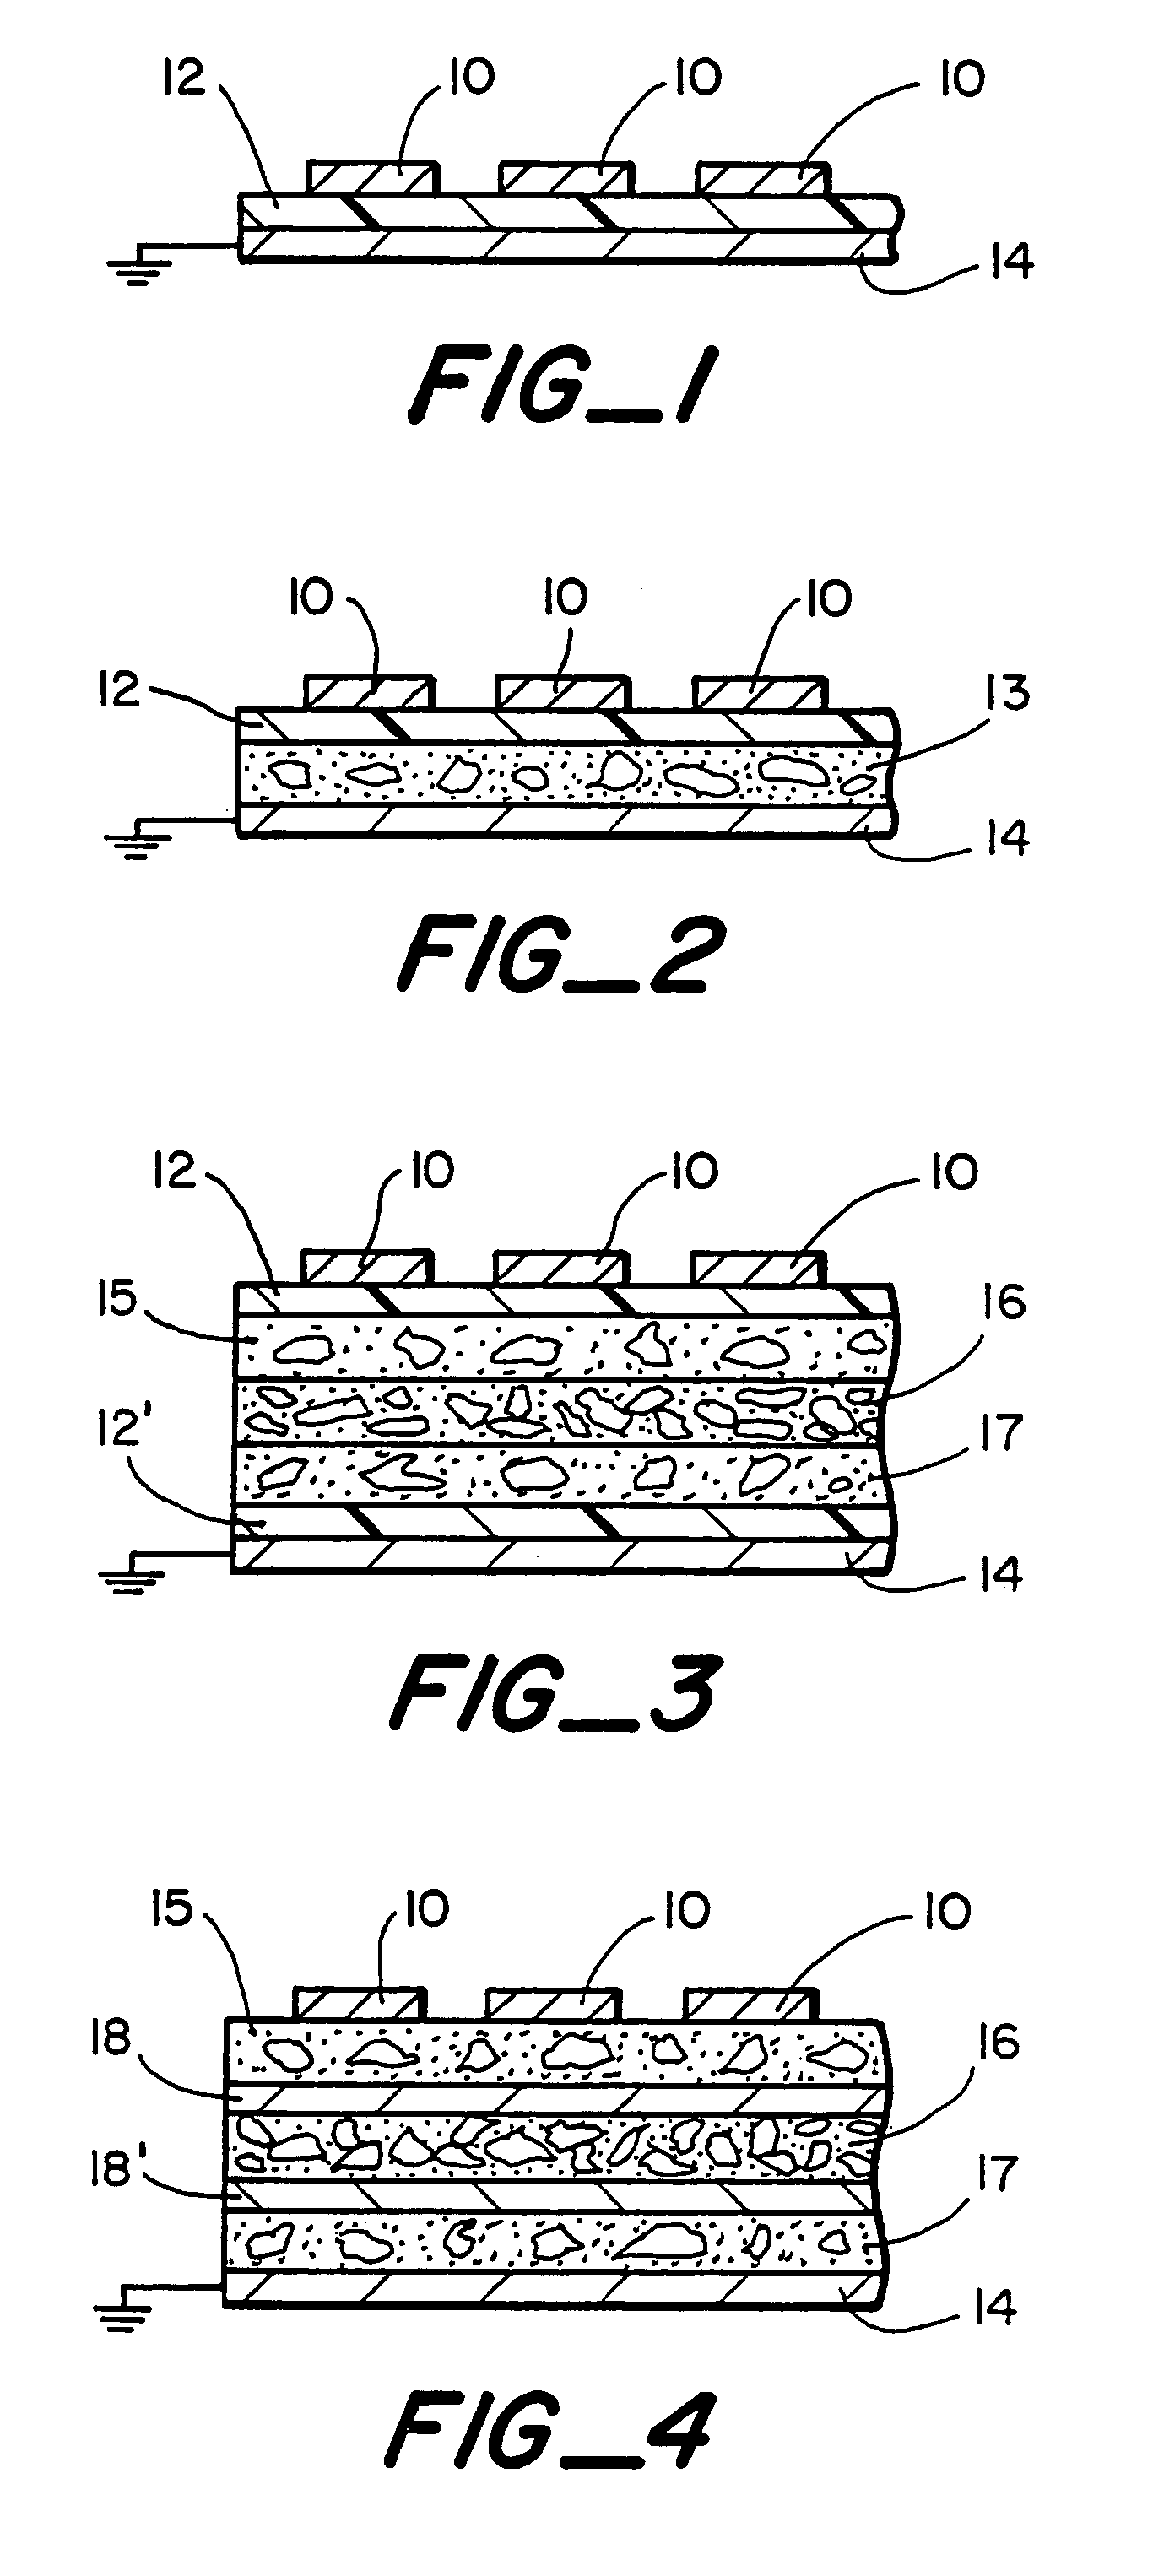 Single and multi layer variable voltage protection devices and method of making same